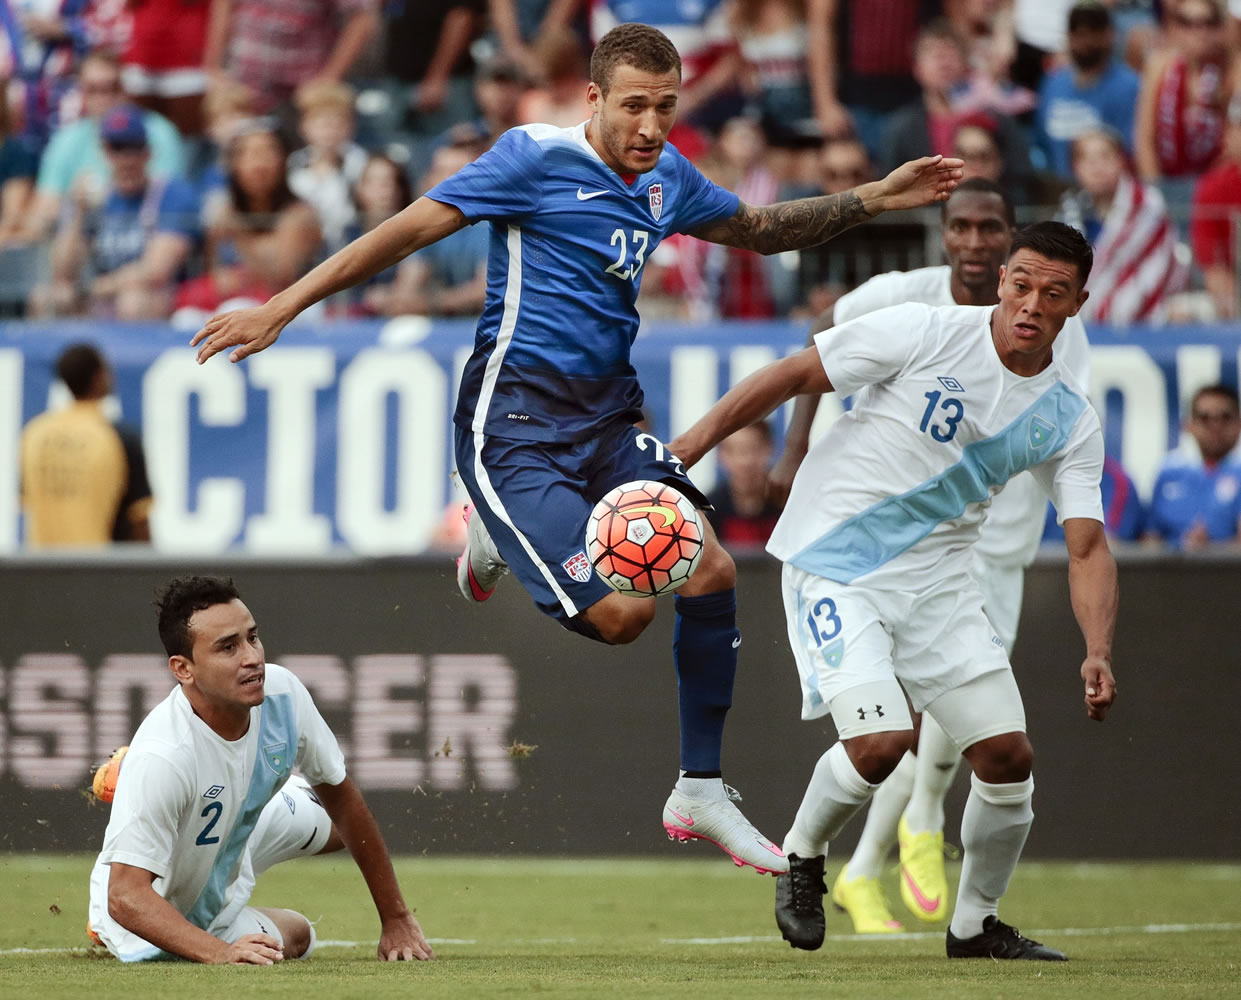 United States' Fabian Johnson midfielder (23) moves the ball between Guatemala defenders Carlos Castrillo (13) and Ruben Morales (2) during the first half of an international friendly soccer match Friday, July 3, 2015, in Nashville, Tenn.